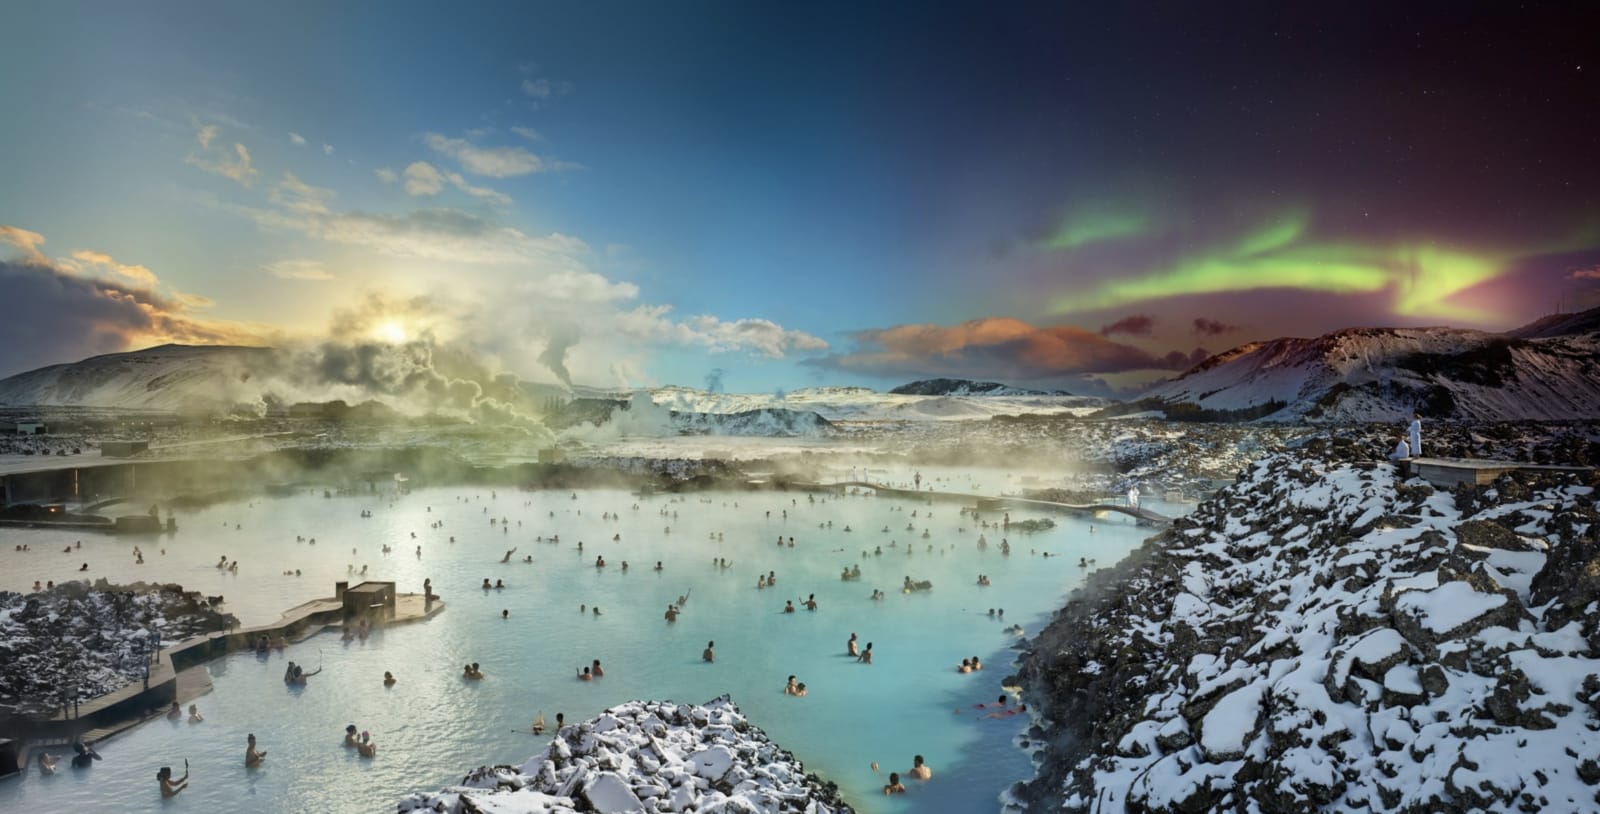 Stephen Wilkes Blue Lagoon, Reykjavik, Iceland, Day to Night, 2019 Signed on label verso 24 x 47 1/2 inch archival pigment print Edition of 20 34 x 67 inch archival pigment print Edition of 15 48 x 94 1/2 inch archival pigment print Edition of 12 60 x 118 inch archival pigment print Edition of 2